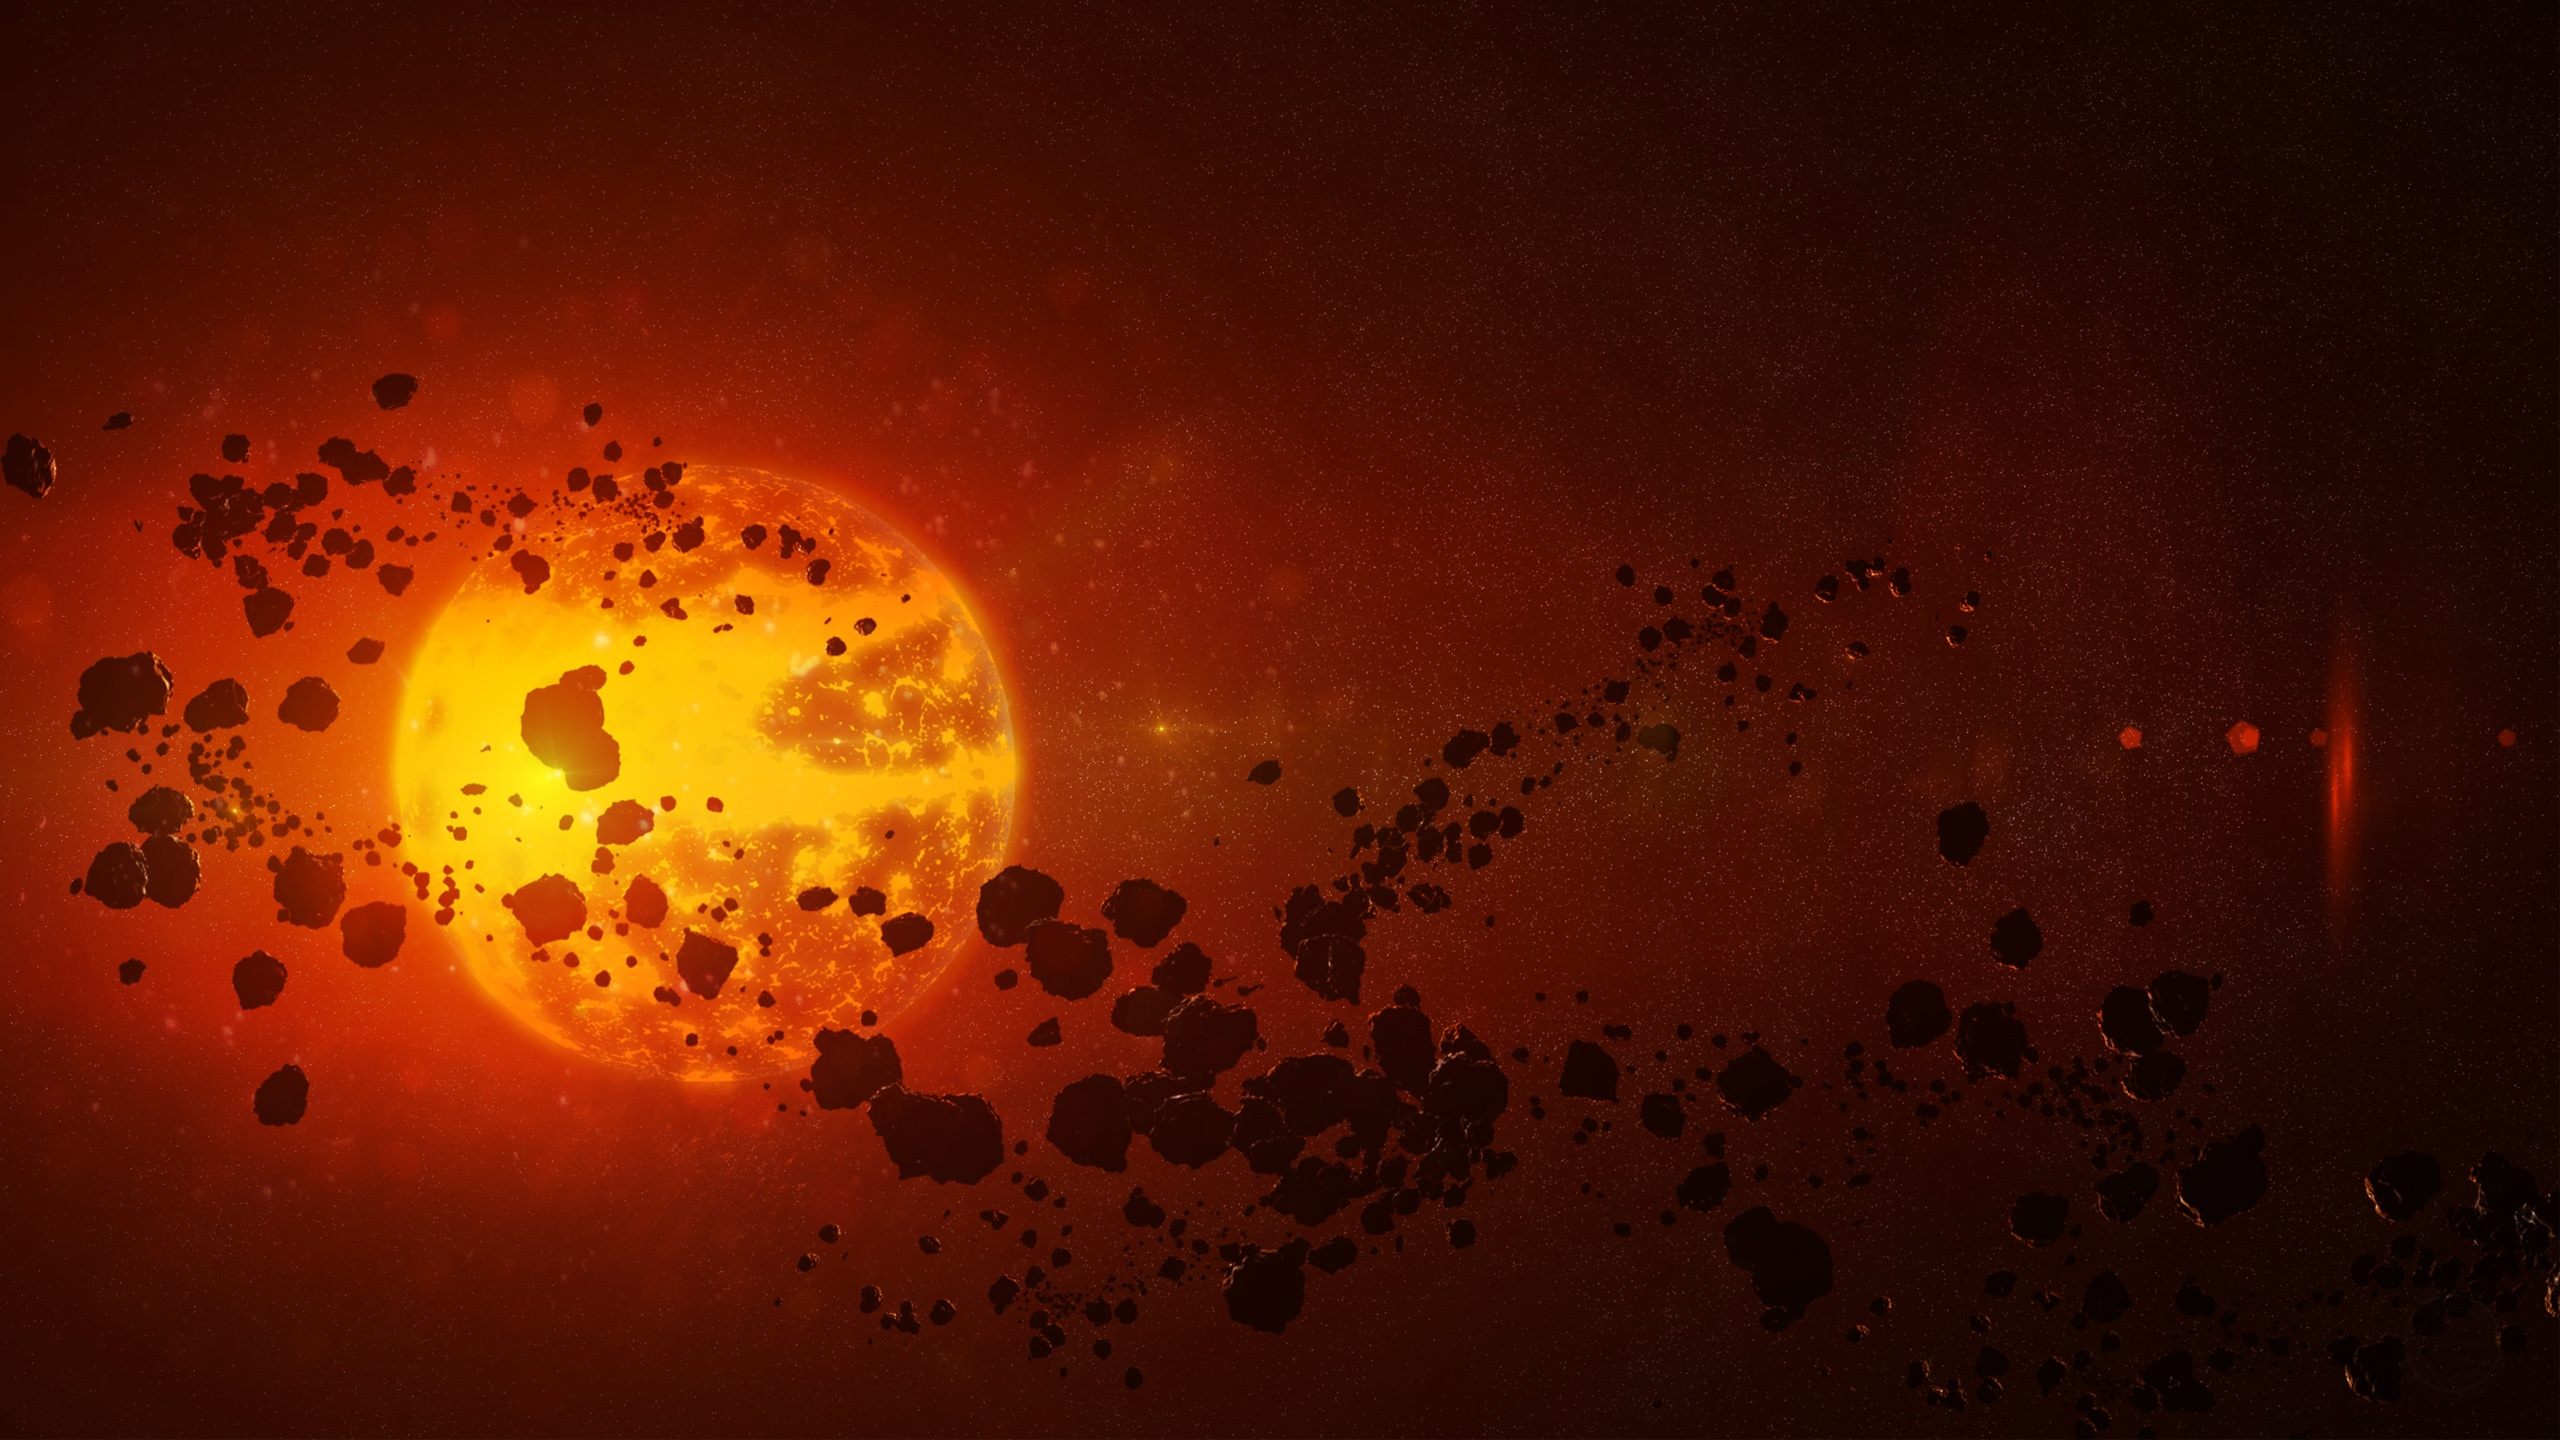 Space Rocks Asteroid And Sun Wallpaper HD For Desktop